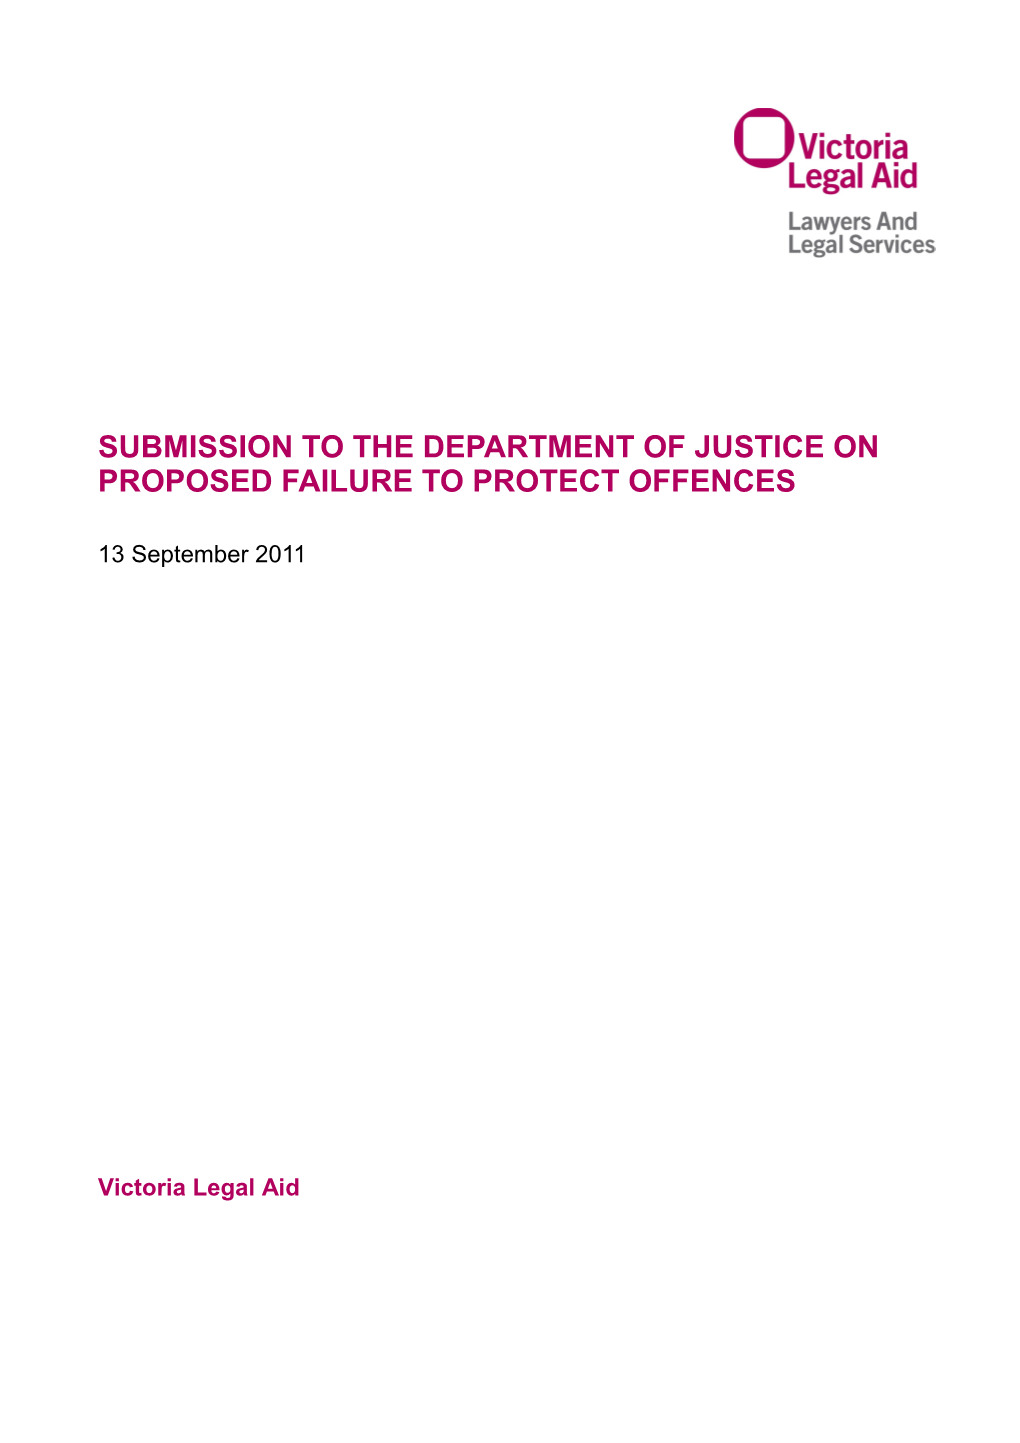 Submission to the Department of Justice on Proposed Failure to Protect Offences